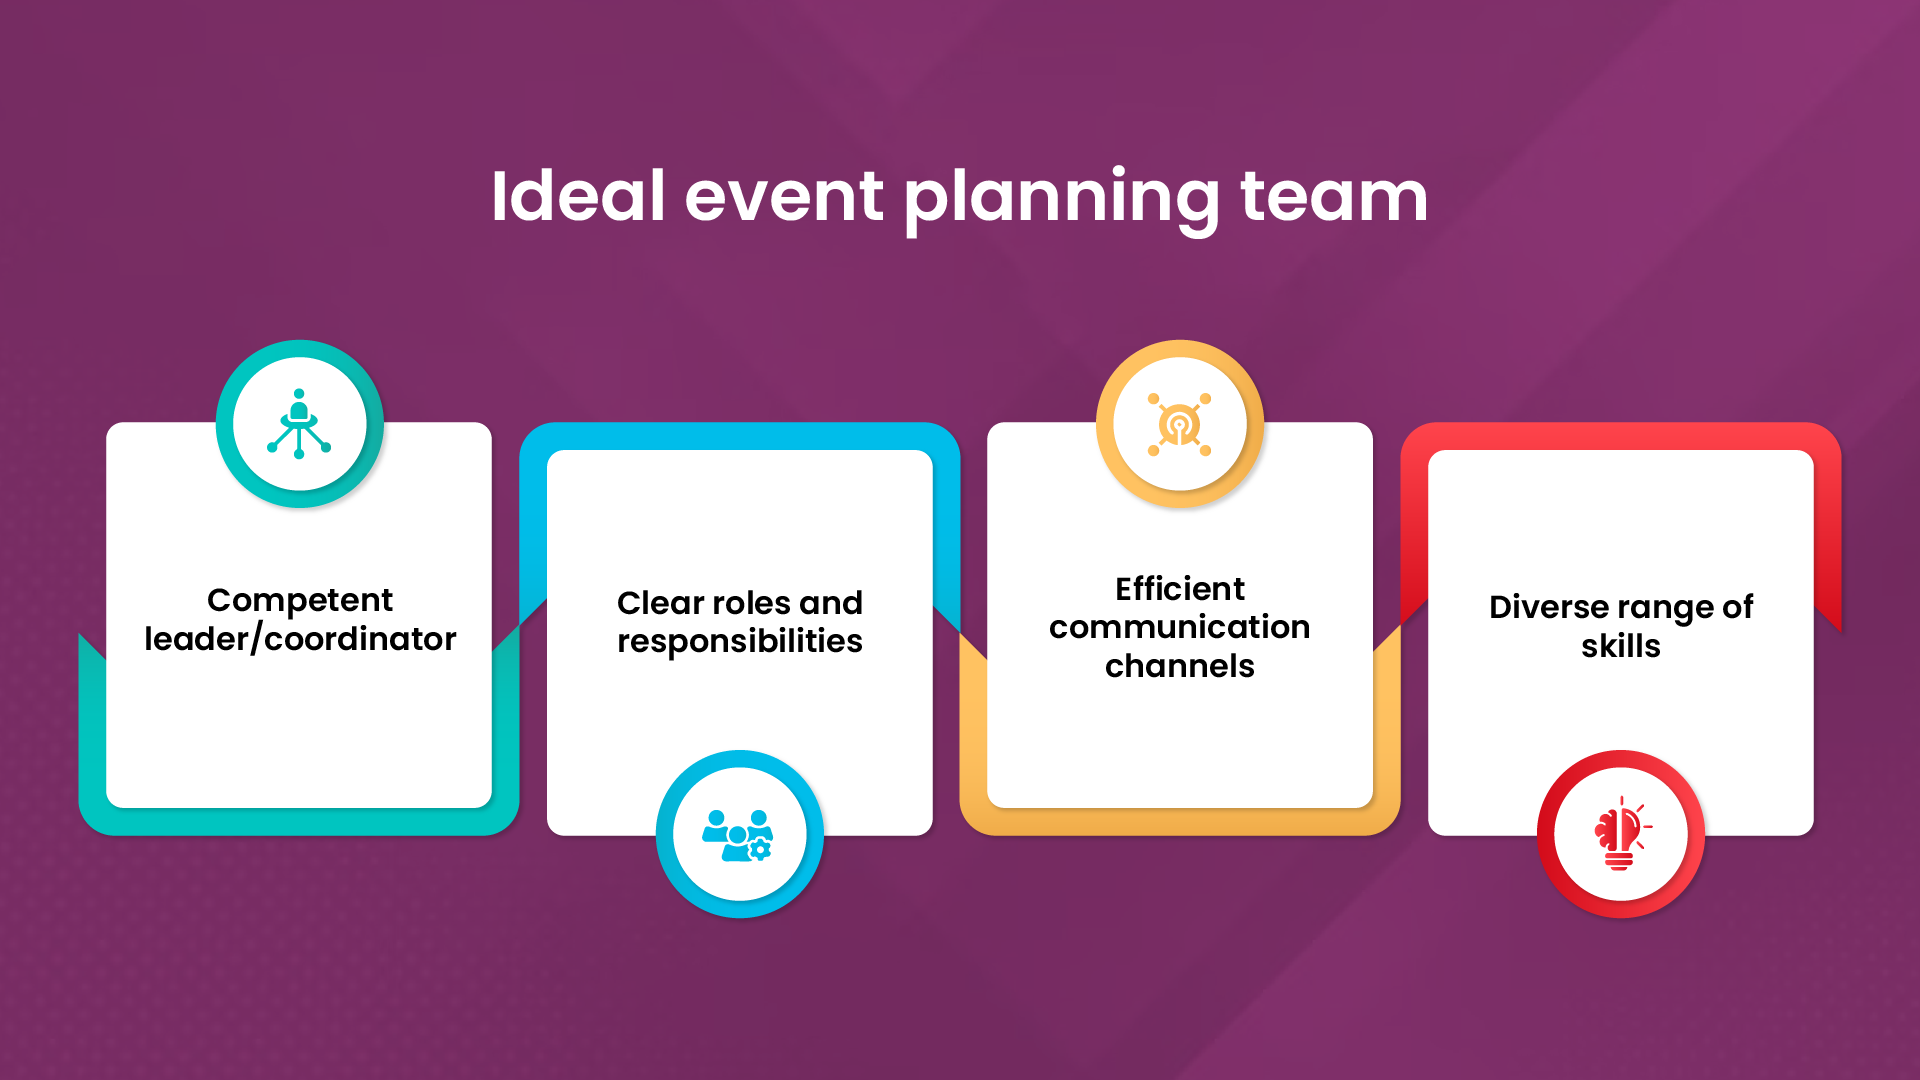 Components of an ideal event planning team